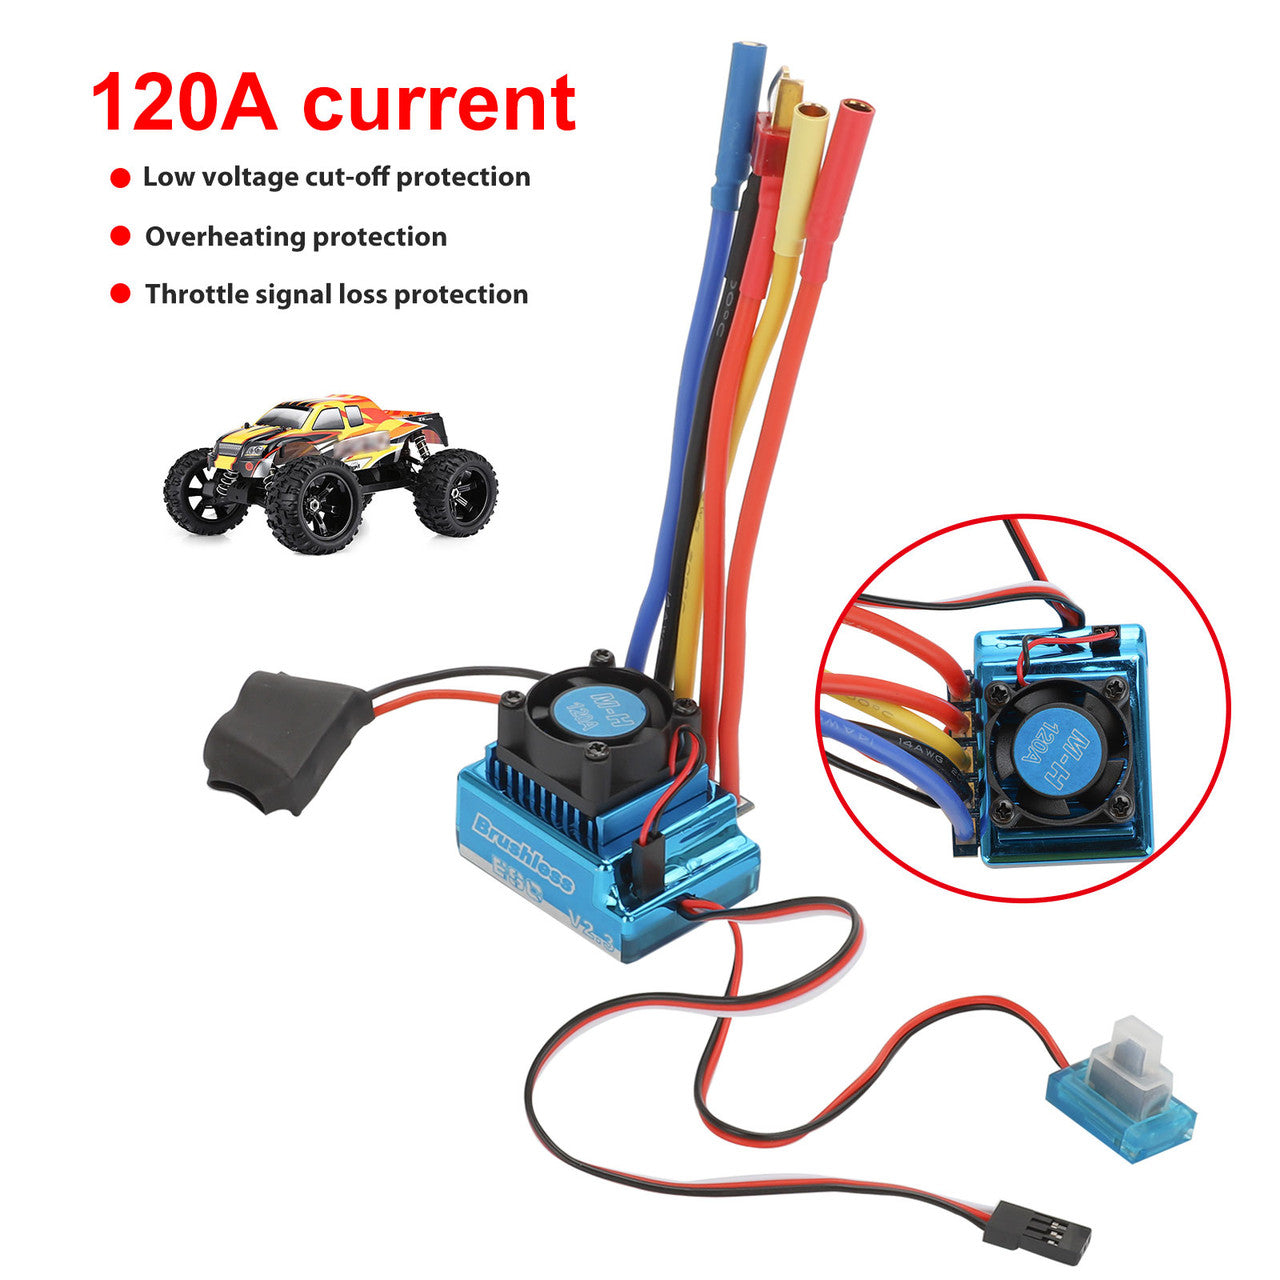 For RC Cars Brushless Speed Controller, 5V/3A Output, Over-heat Protection